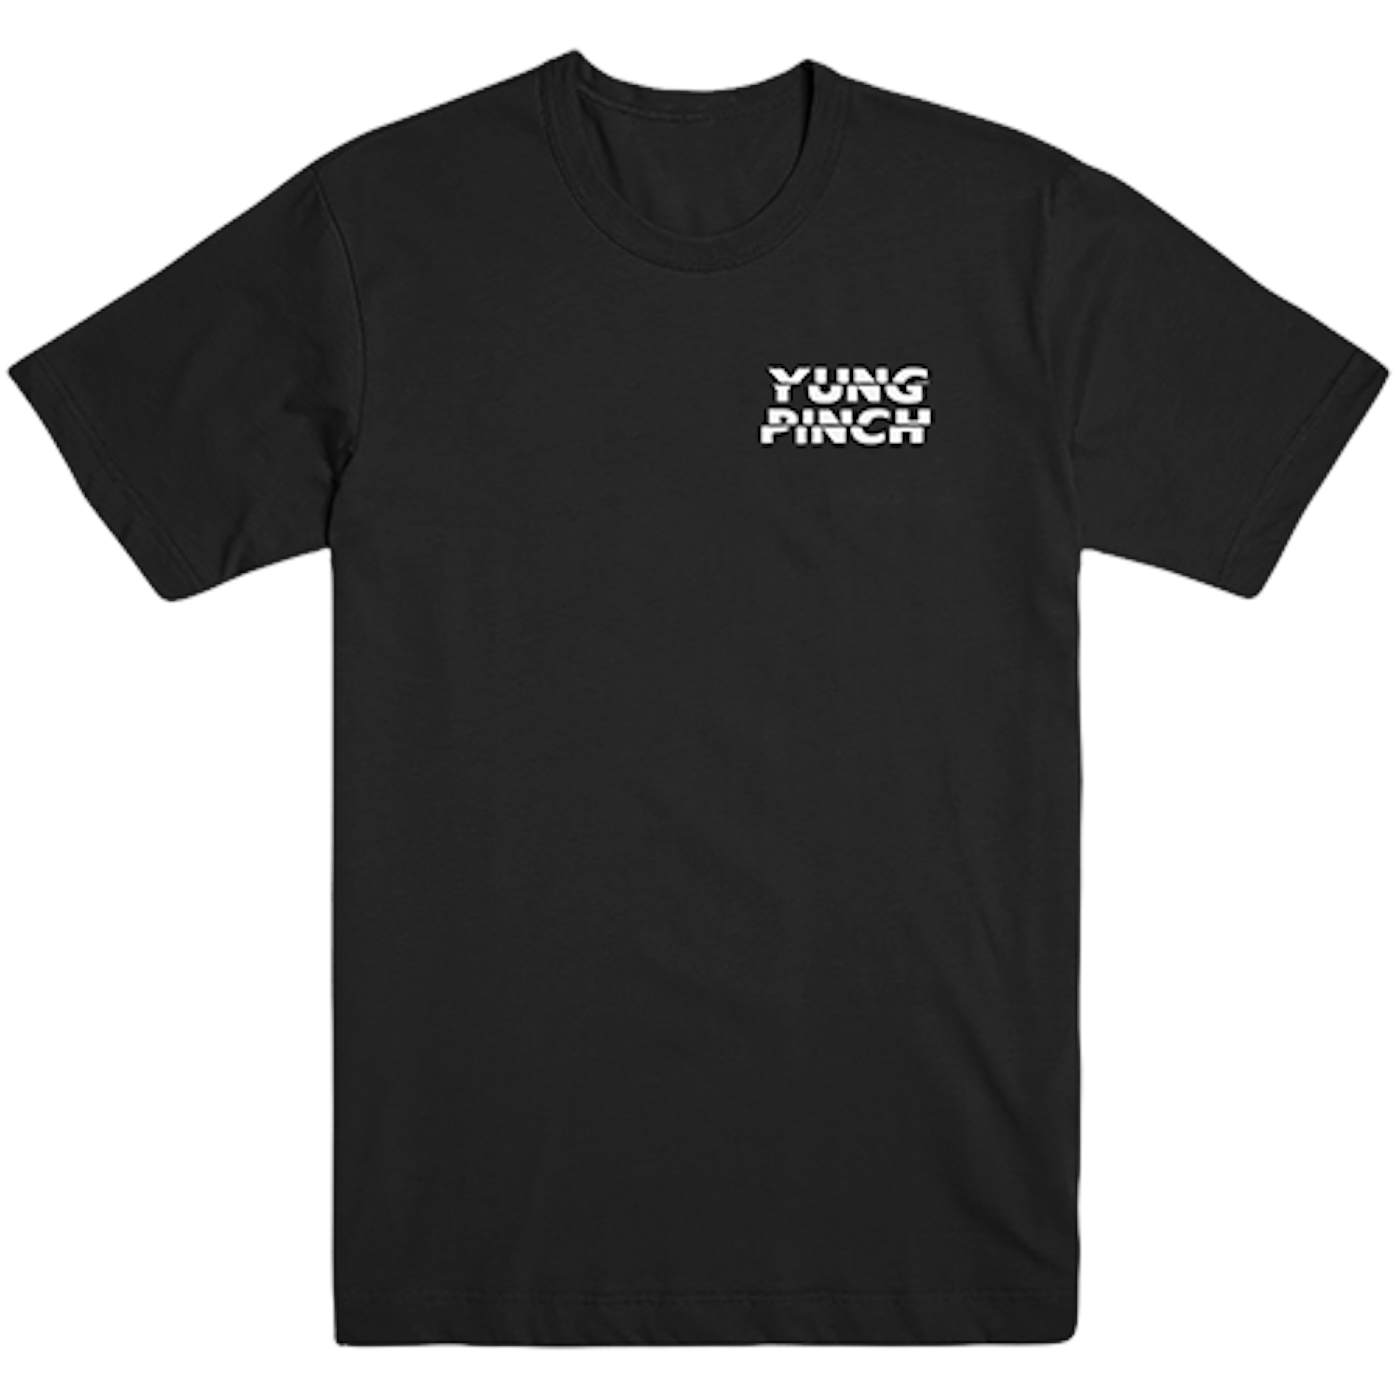 Yung Pinch All 4 The Love Tour Dates Tee